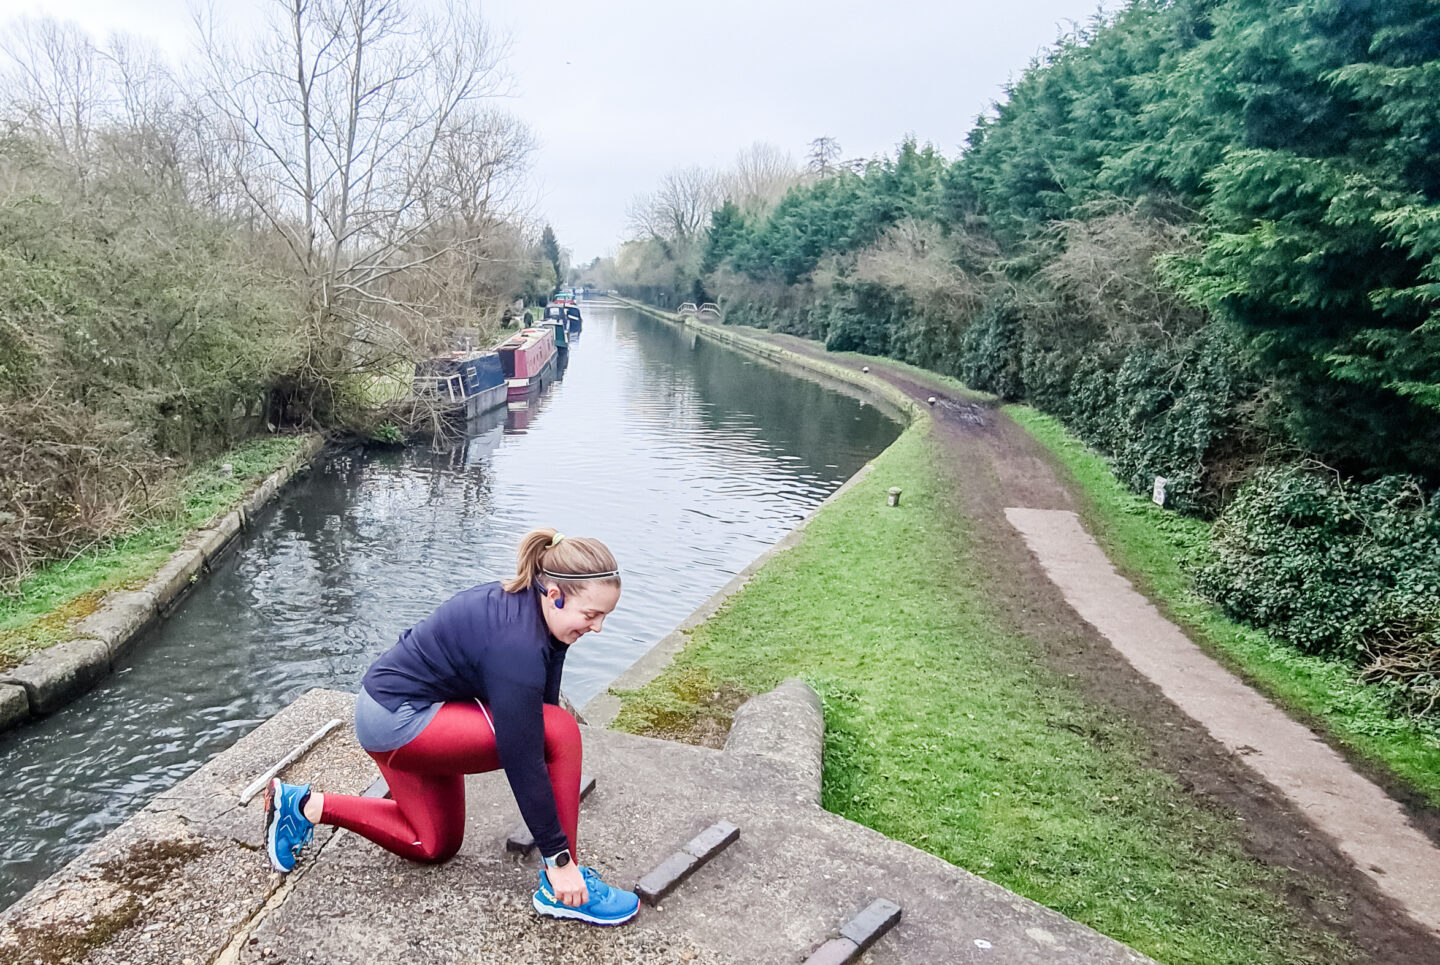 Woman in red running leggings and black top kneels to tie her shoelaces on canal towpath next to the canal (seen behind her)